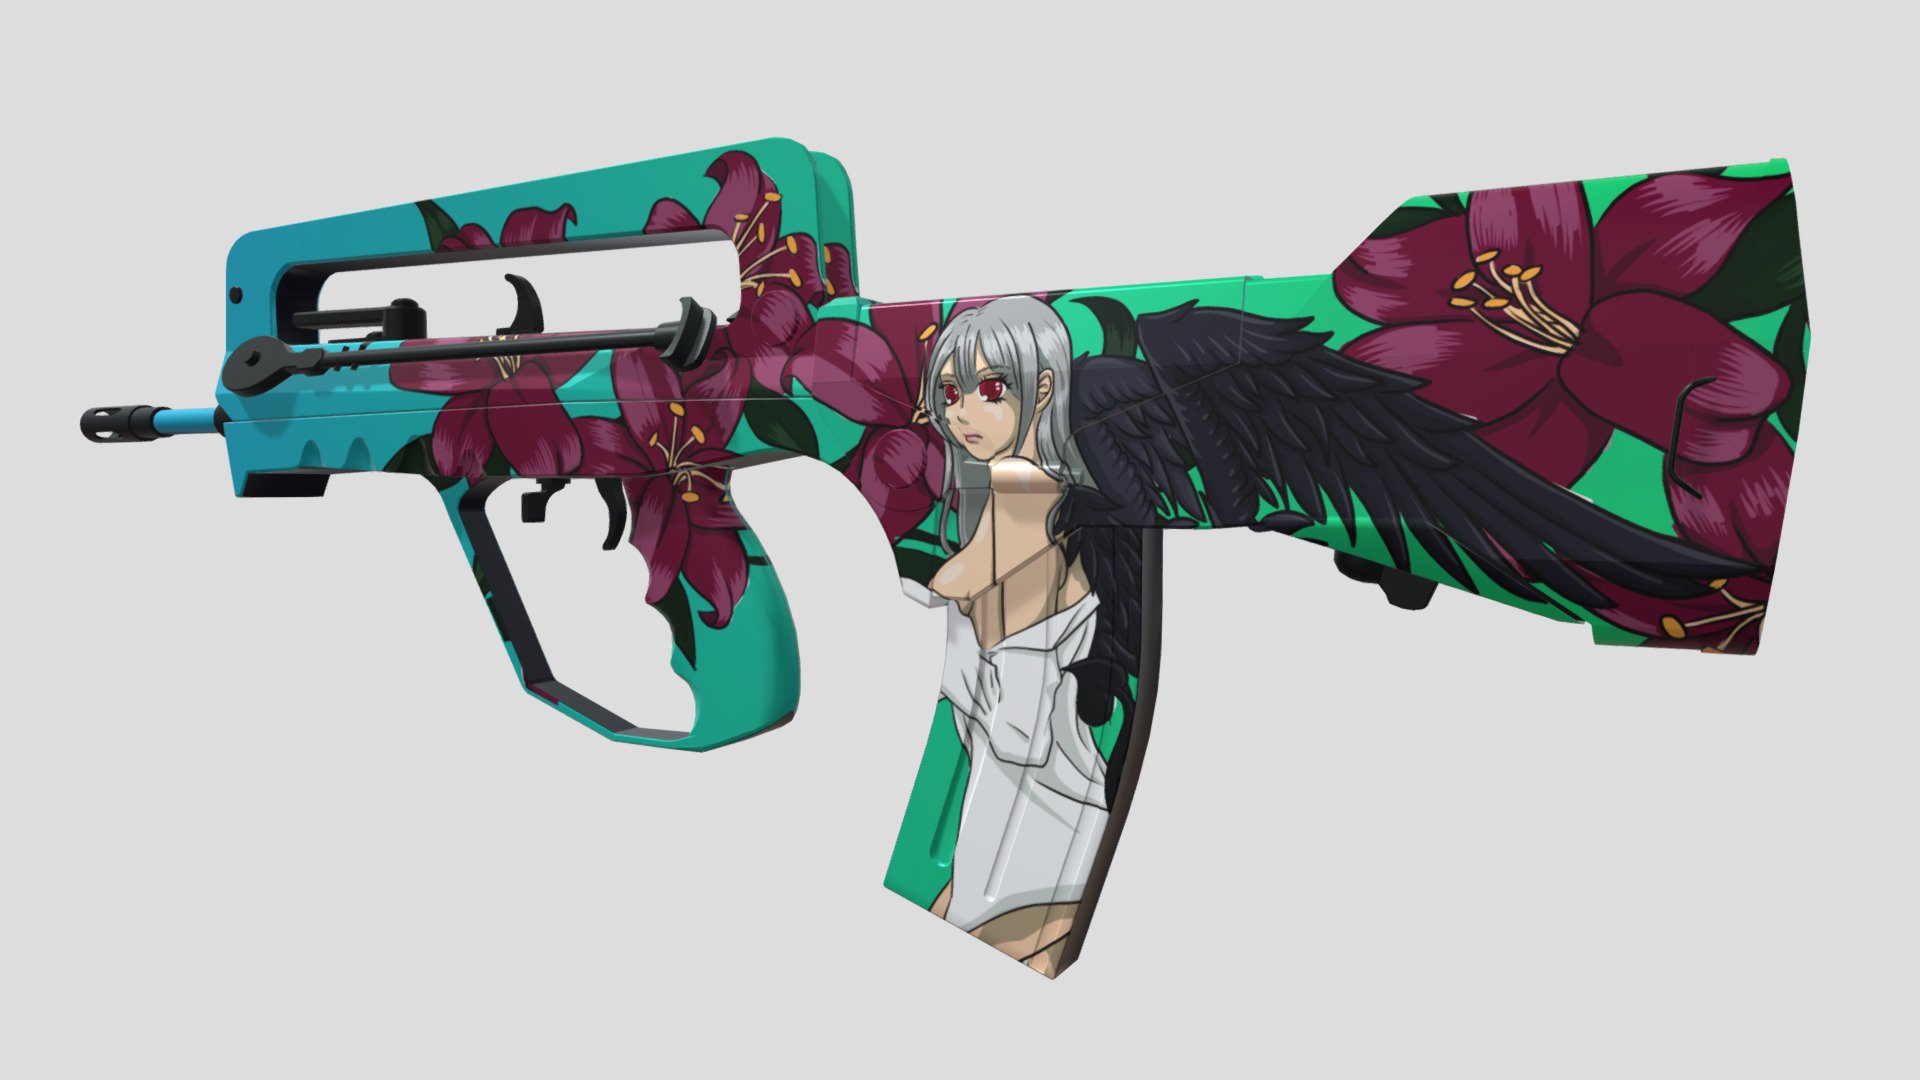 One entry to the dreams and nightmare contest for Counter-Strike: Global Offnesive.
If you want to see it in the workshop, go to  https://steamcommunity.com/sharedfiles/filedetails/?id=2633014130 - FAMAS_Succubus - 3D model by holdograd 3d model